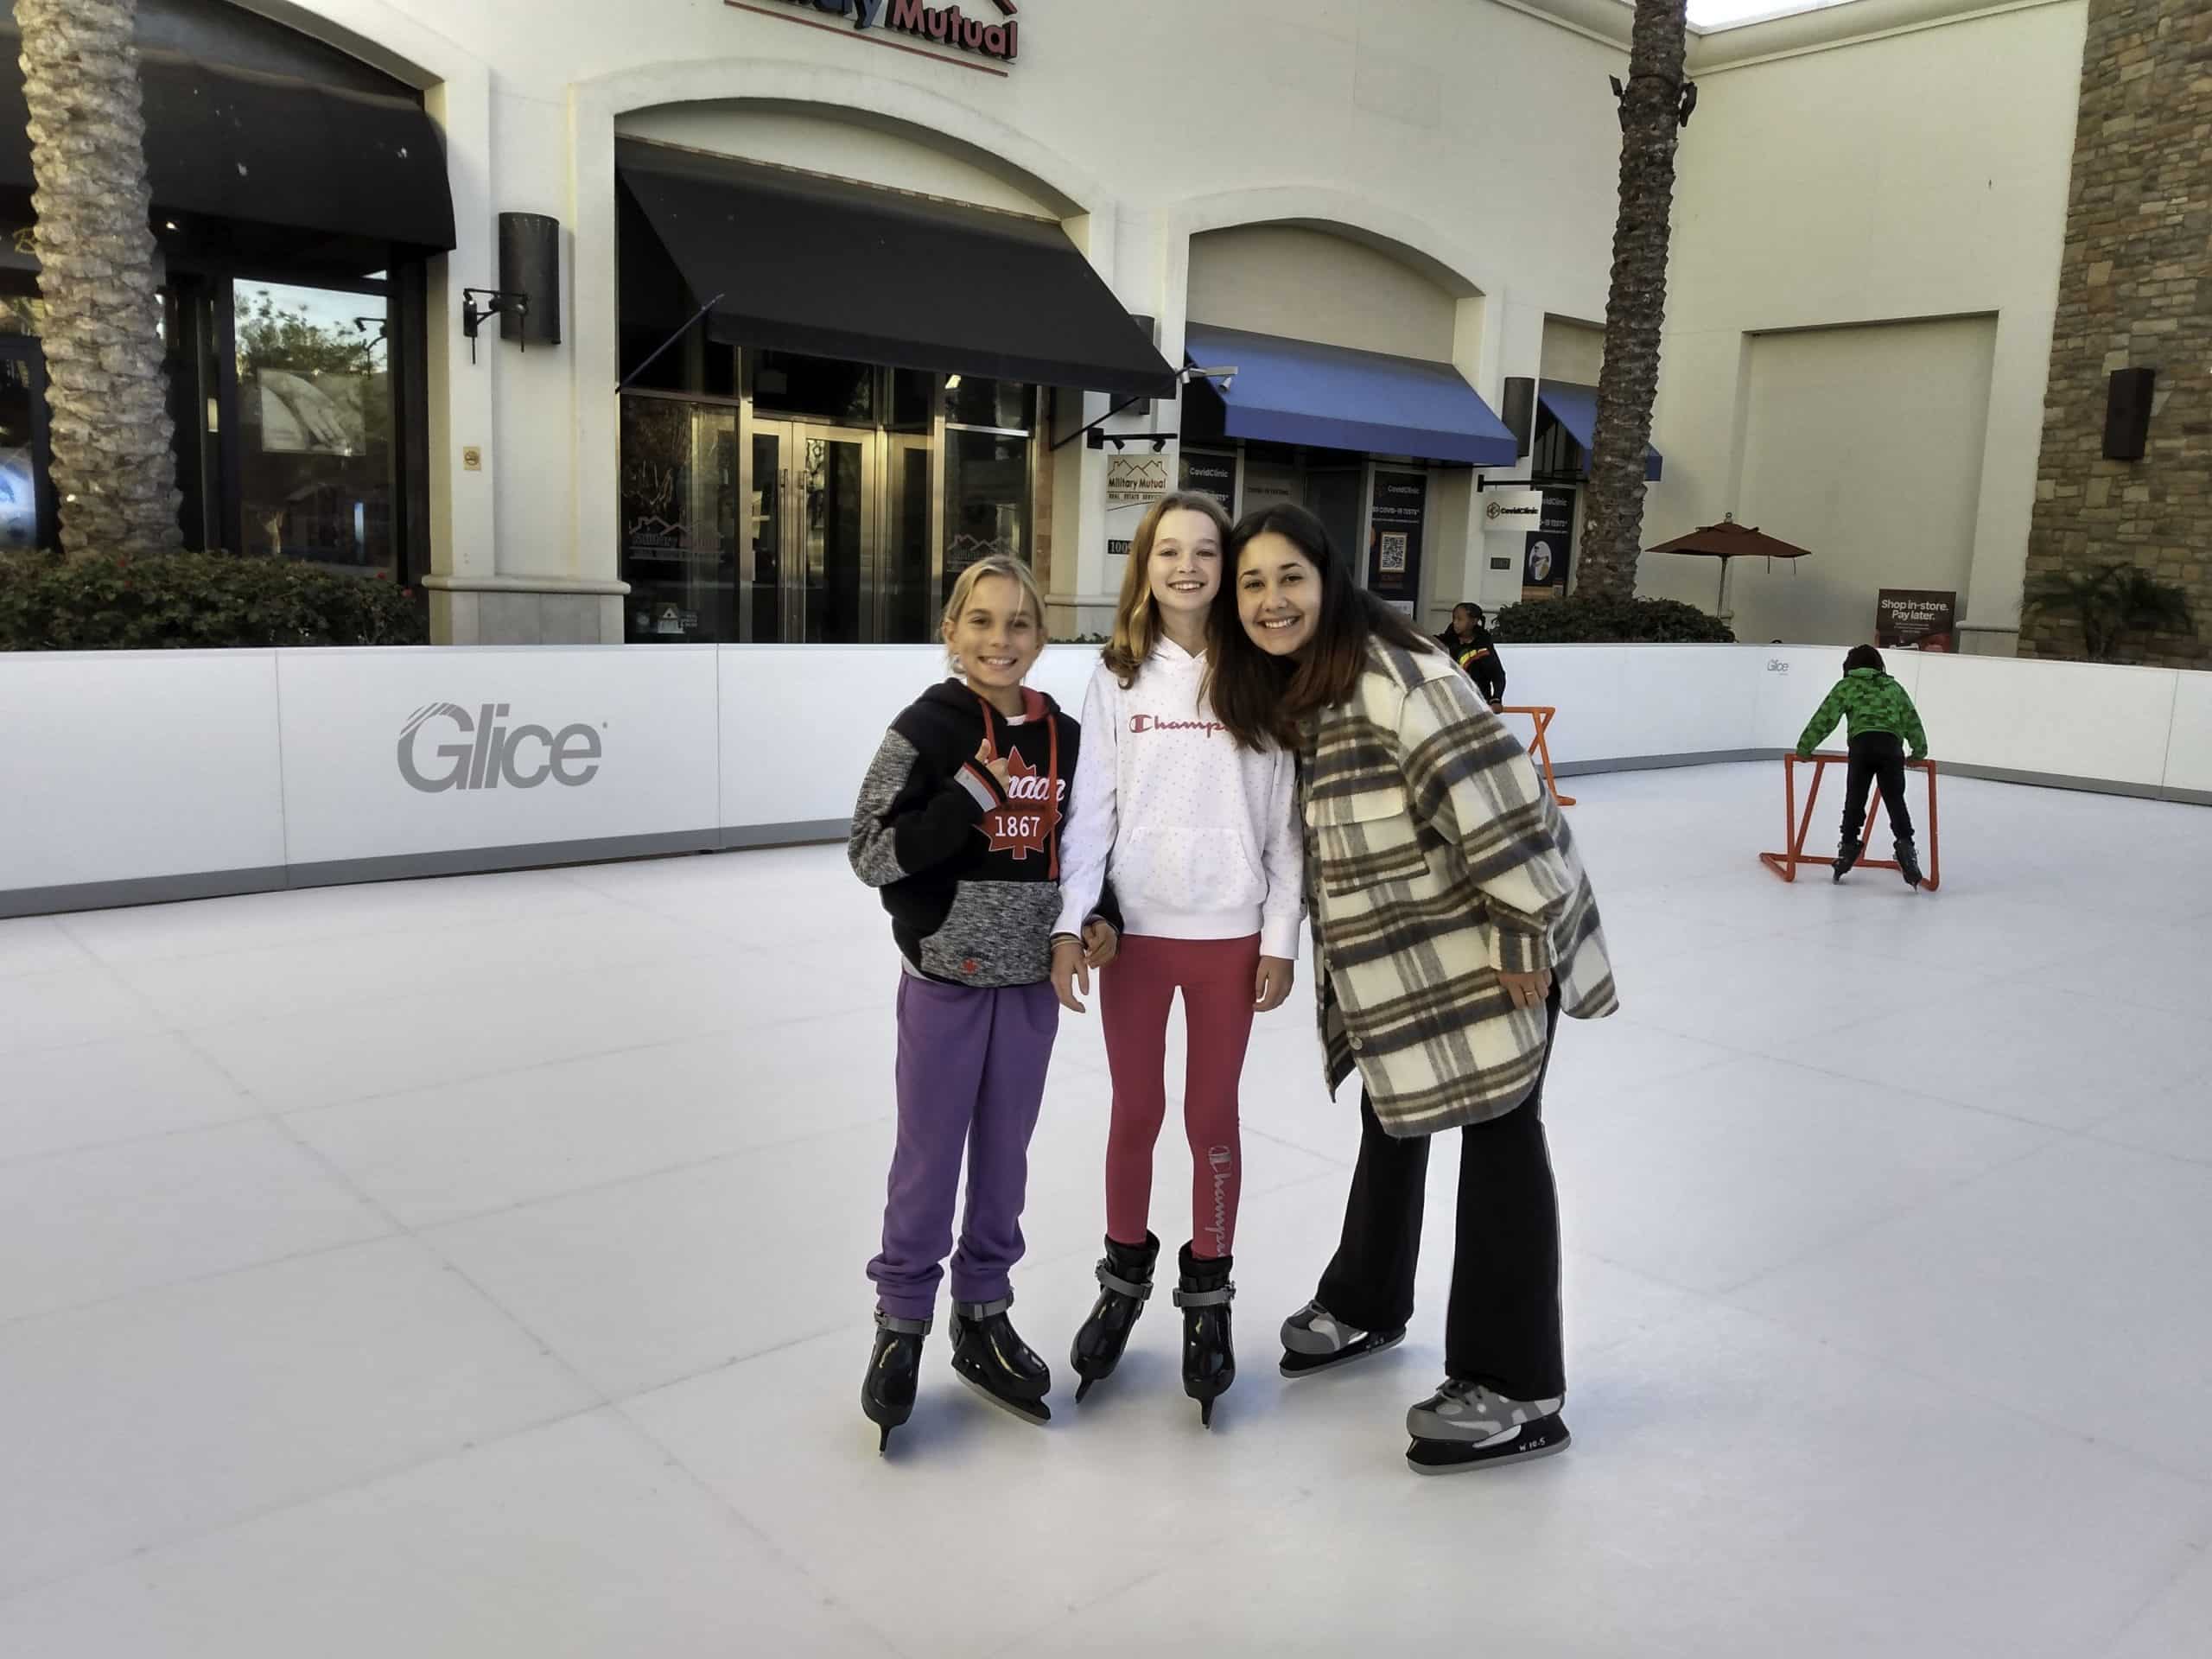 Ice skating in California thanks to synthetic ice